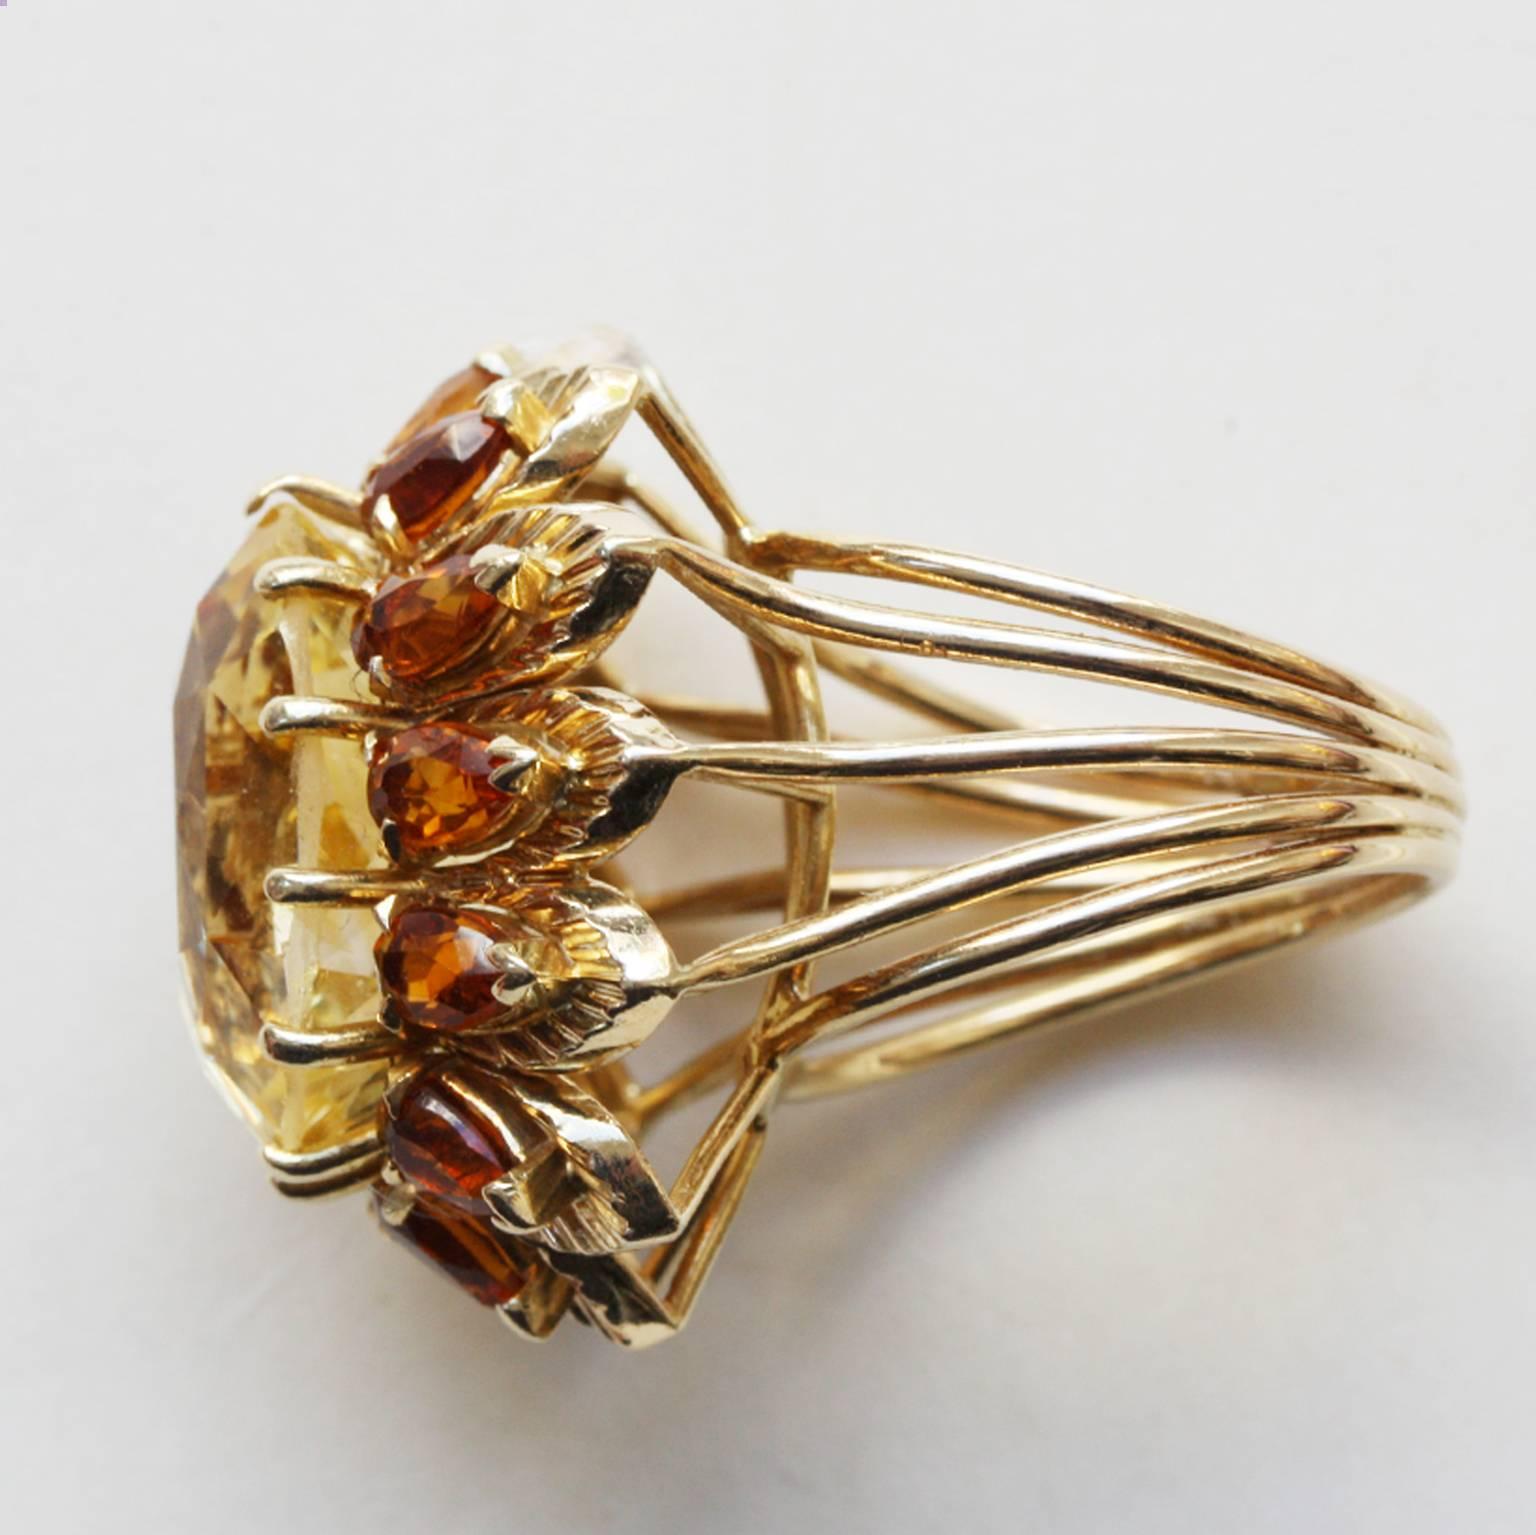 An 18-carat gold cocktail ring set with an oval-cut yellow natural Ceylon sapphire (app. 14 carats) surrounded by 12 pear-cut citrines, circa 1960.

ring size: 16.75 mm / 6 ¼ US
weight: 13.7 grams
dimensions sapphire: 16.9 x 12.4 cm